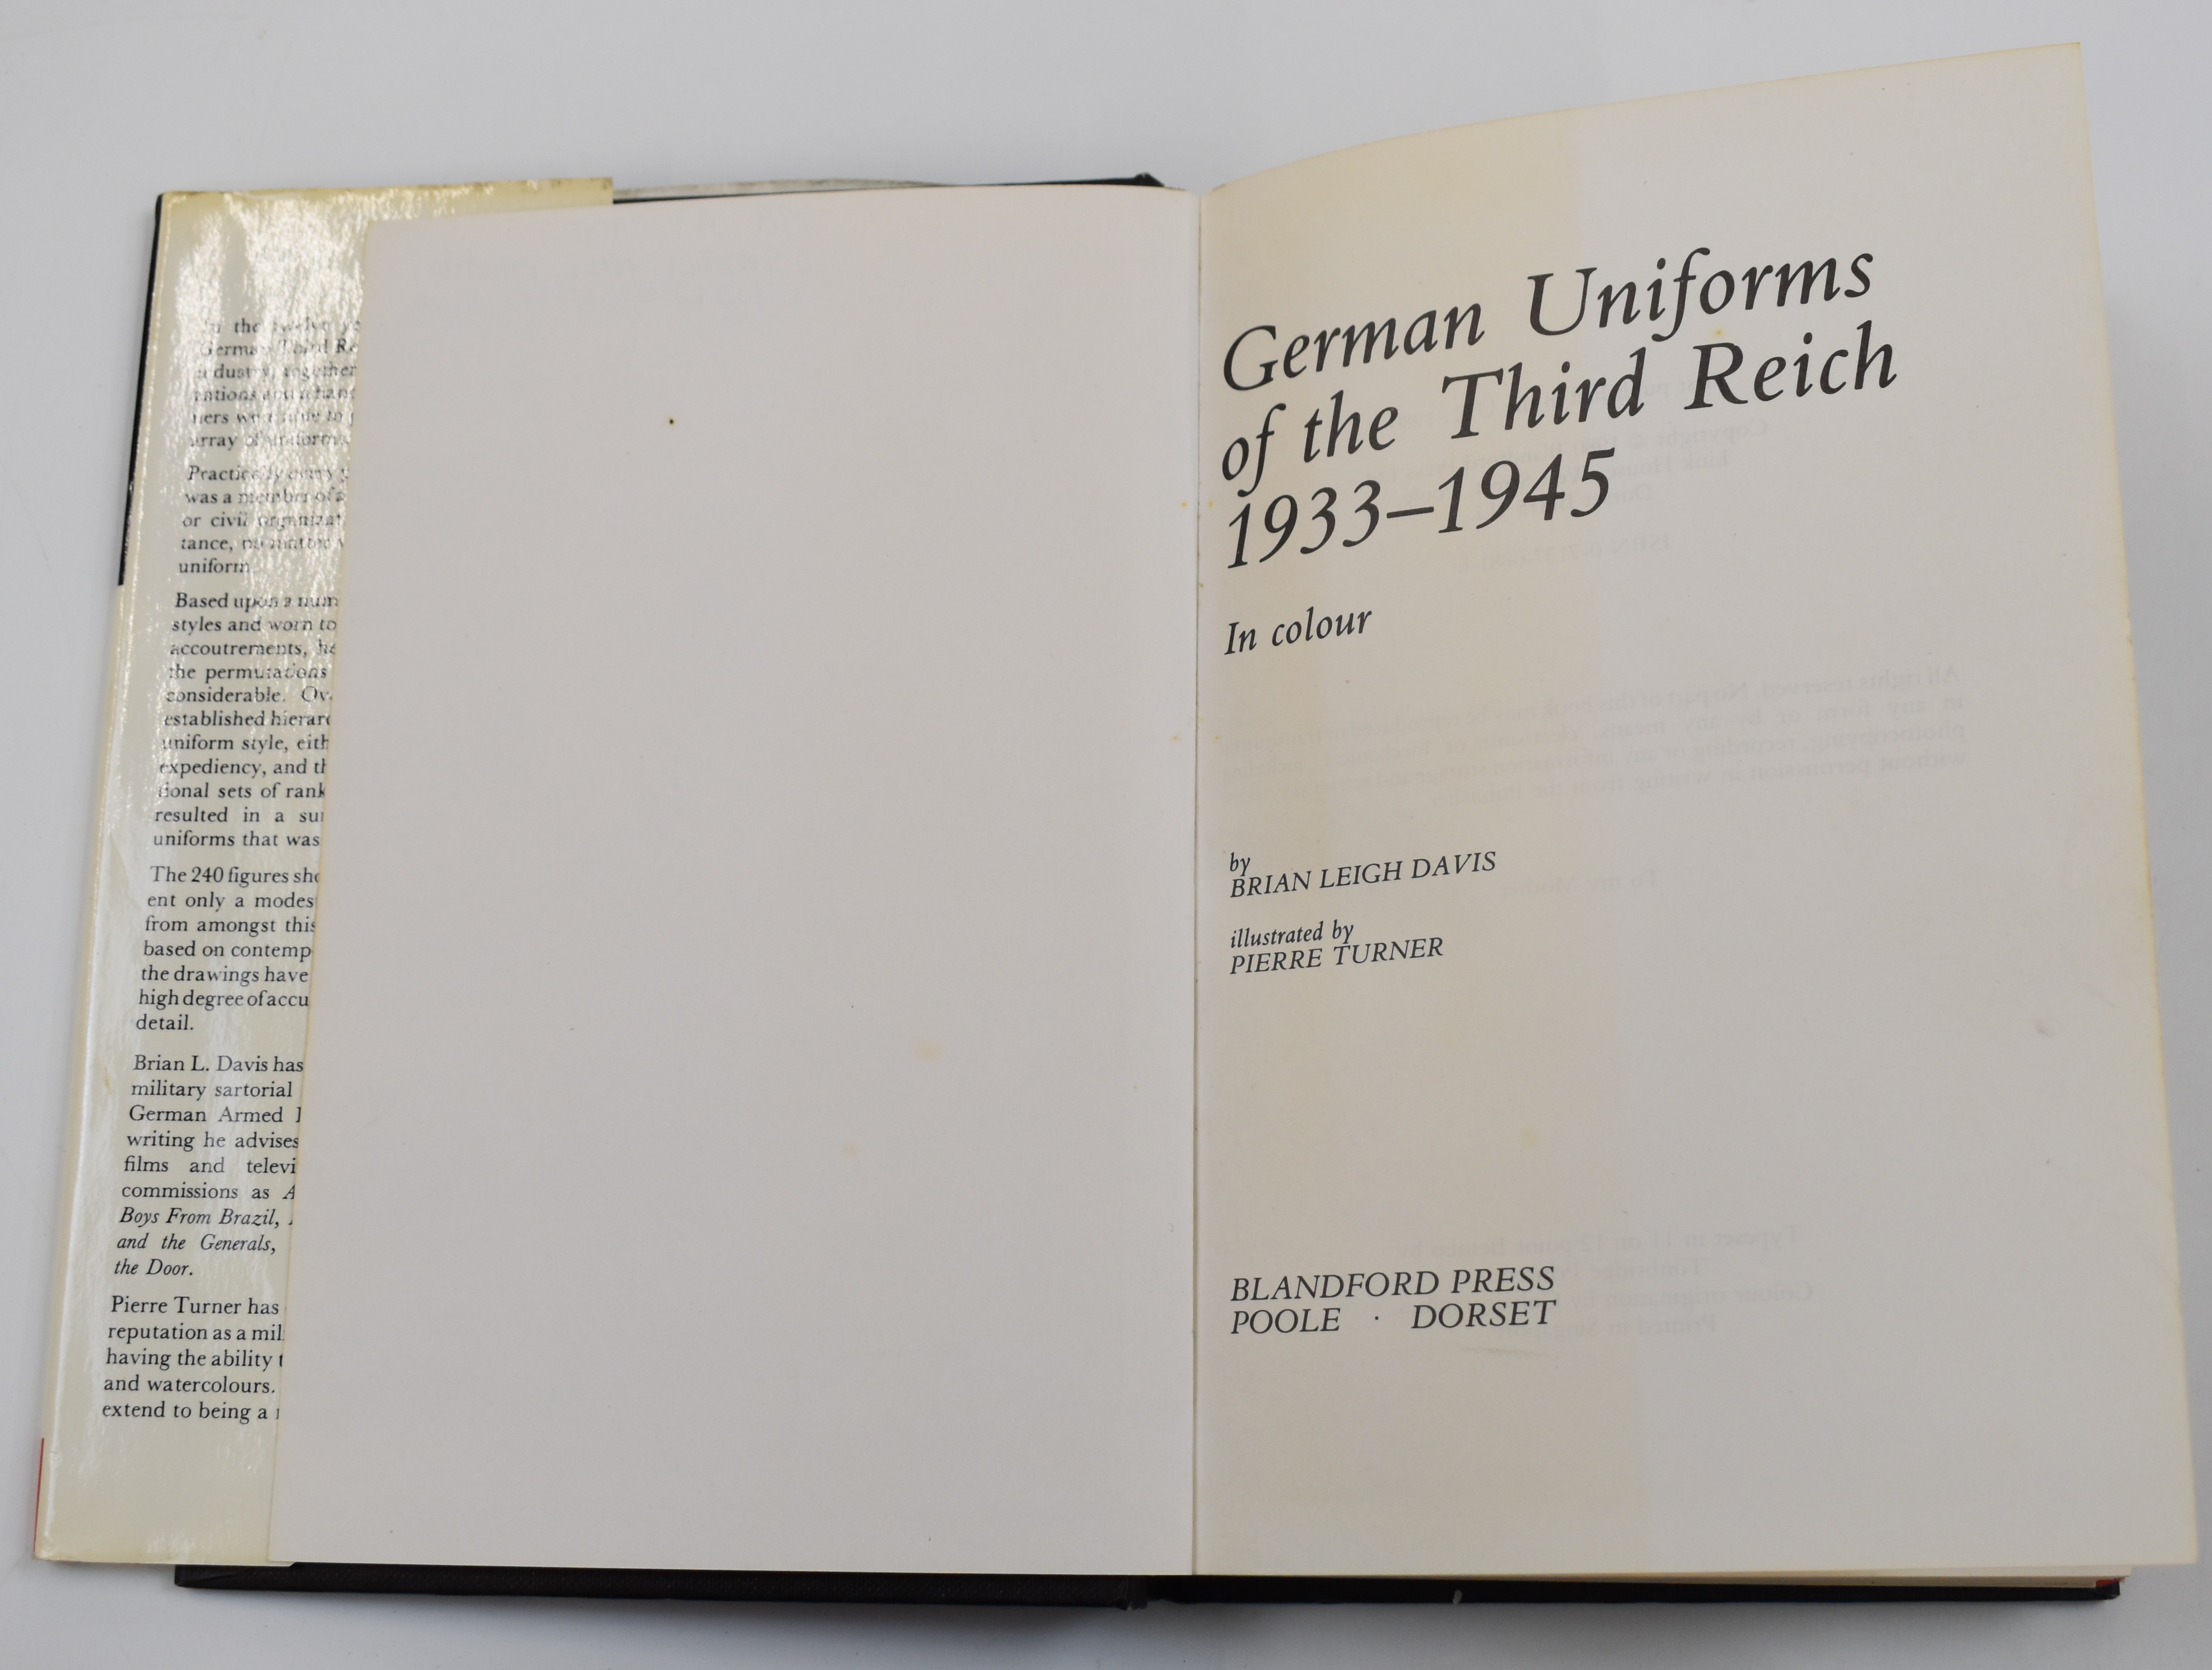 Germany Army Uniforms & Insignia 1933-1945 by Brian Davis 1977. Badges & Insignia of the Third Reich - Image 6 of 6